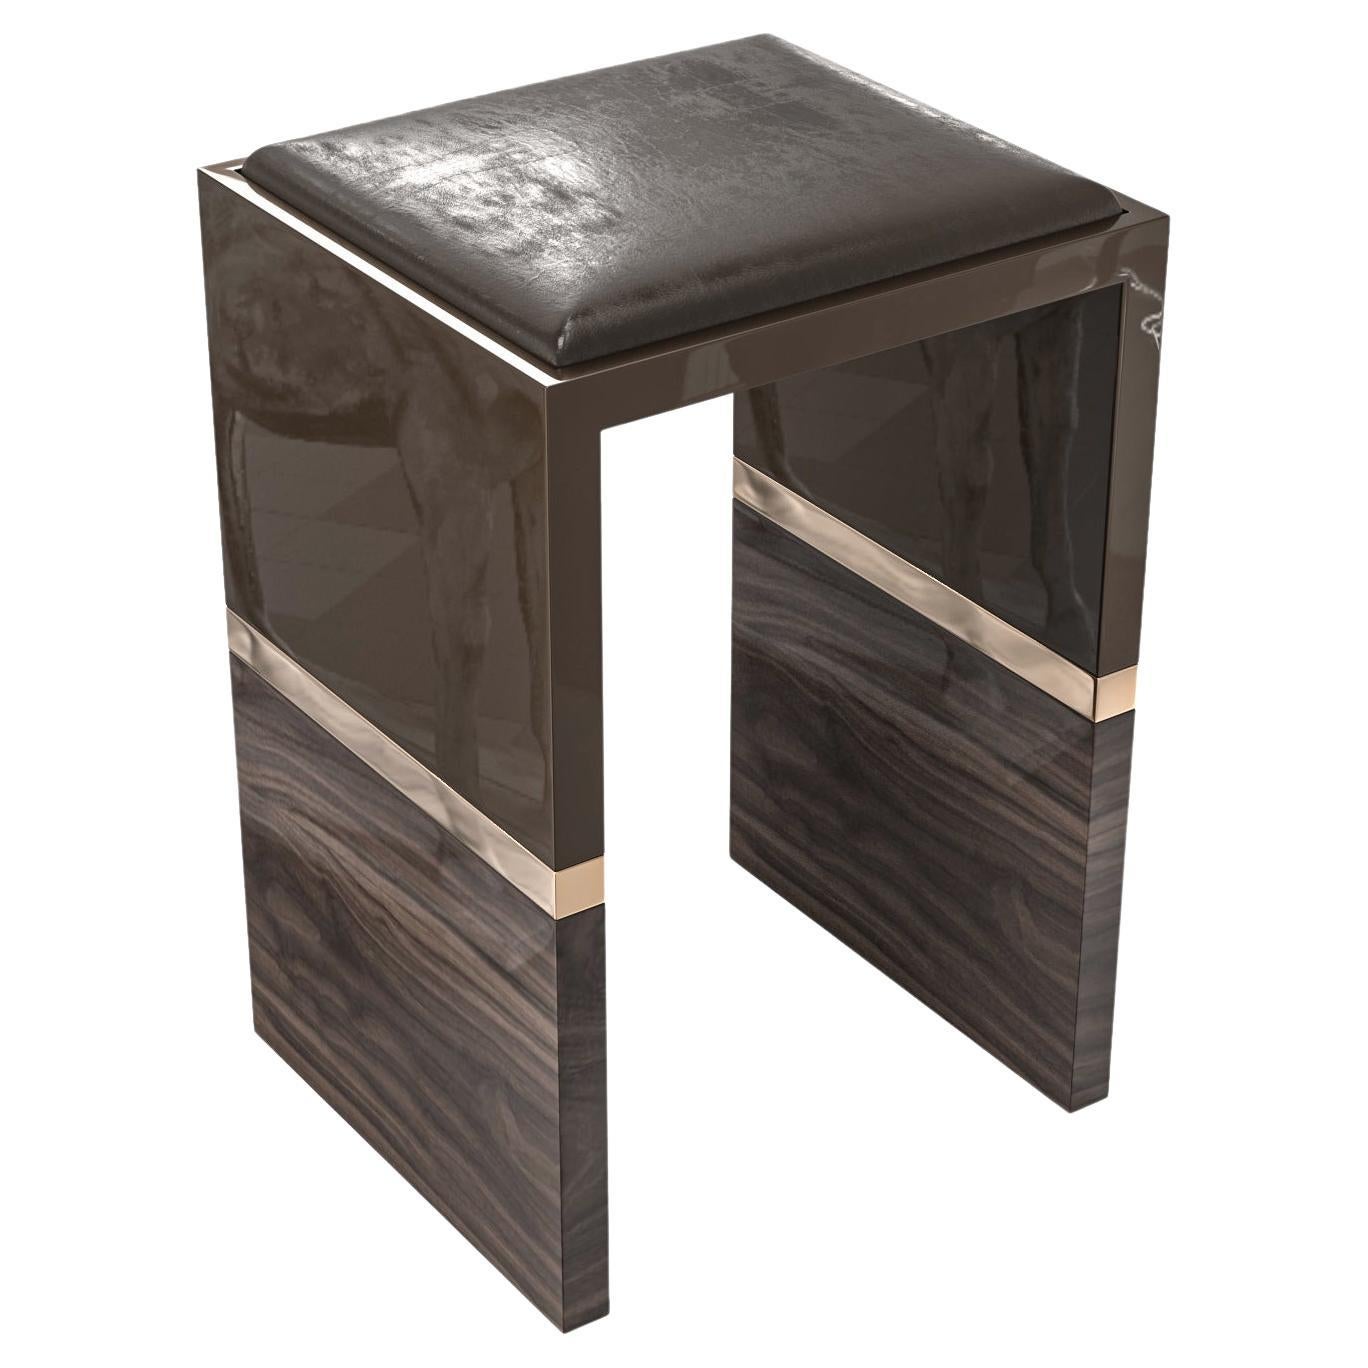 "Galeone" Bar Stool with Stainless Steel, Walnut and Bronze Details, Istanbul For Sale